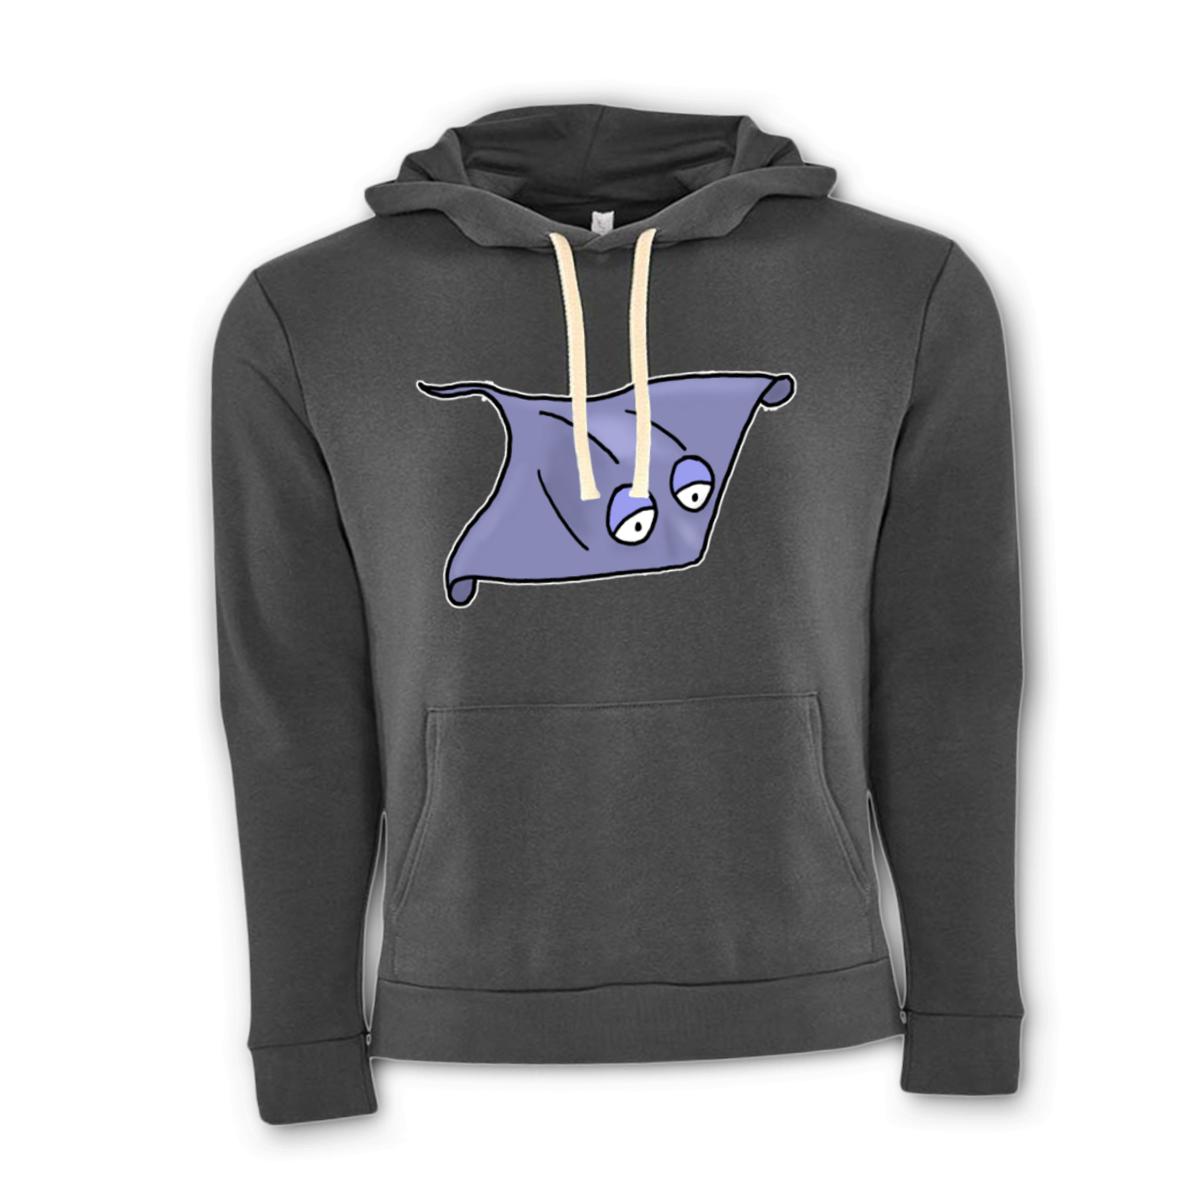 Stingray Unisex Pullover Hoodie Small heavy-metal